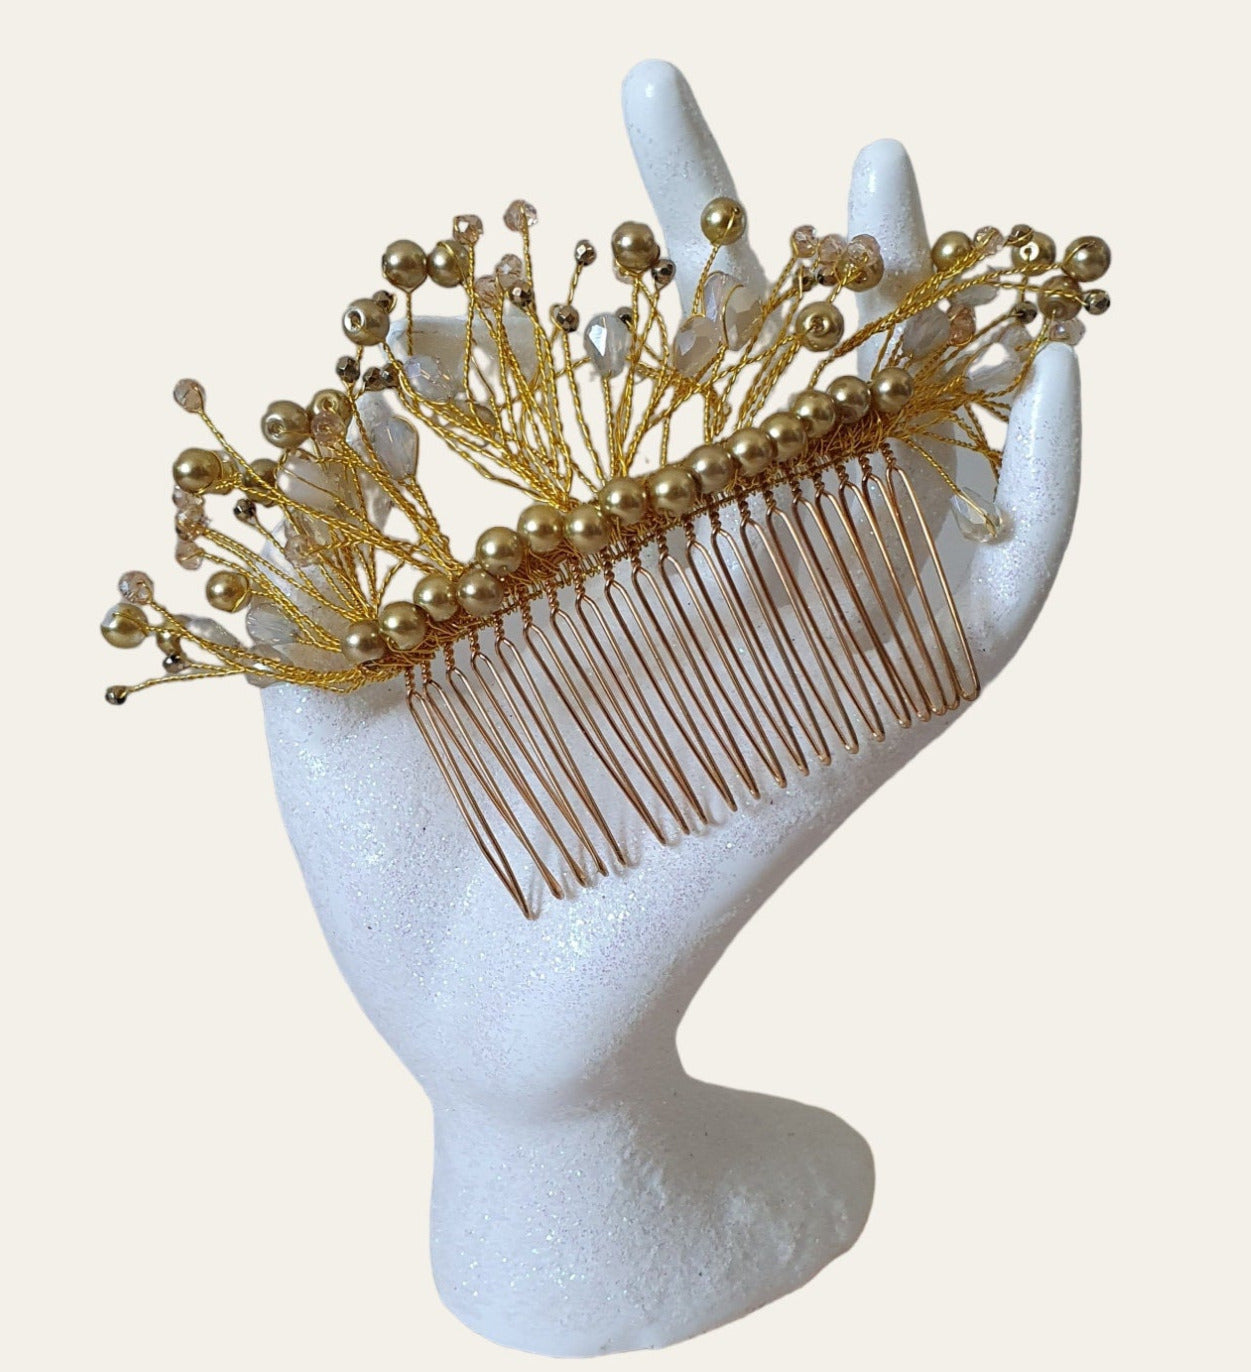 Handmade bridal comb with pearls and drop stones - Elegant hair accessory for weddings, weddings and parties, gold-colored metal comb